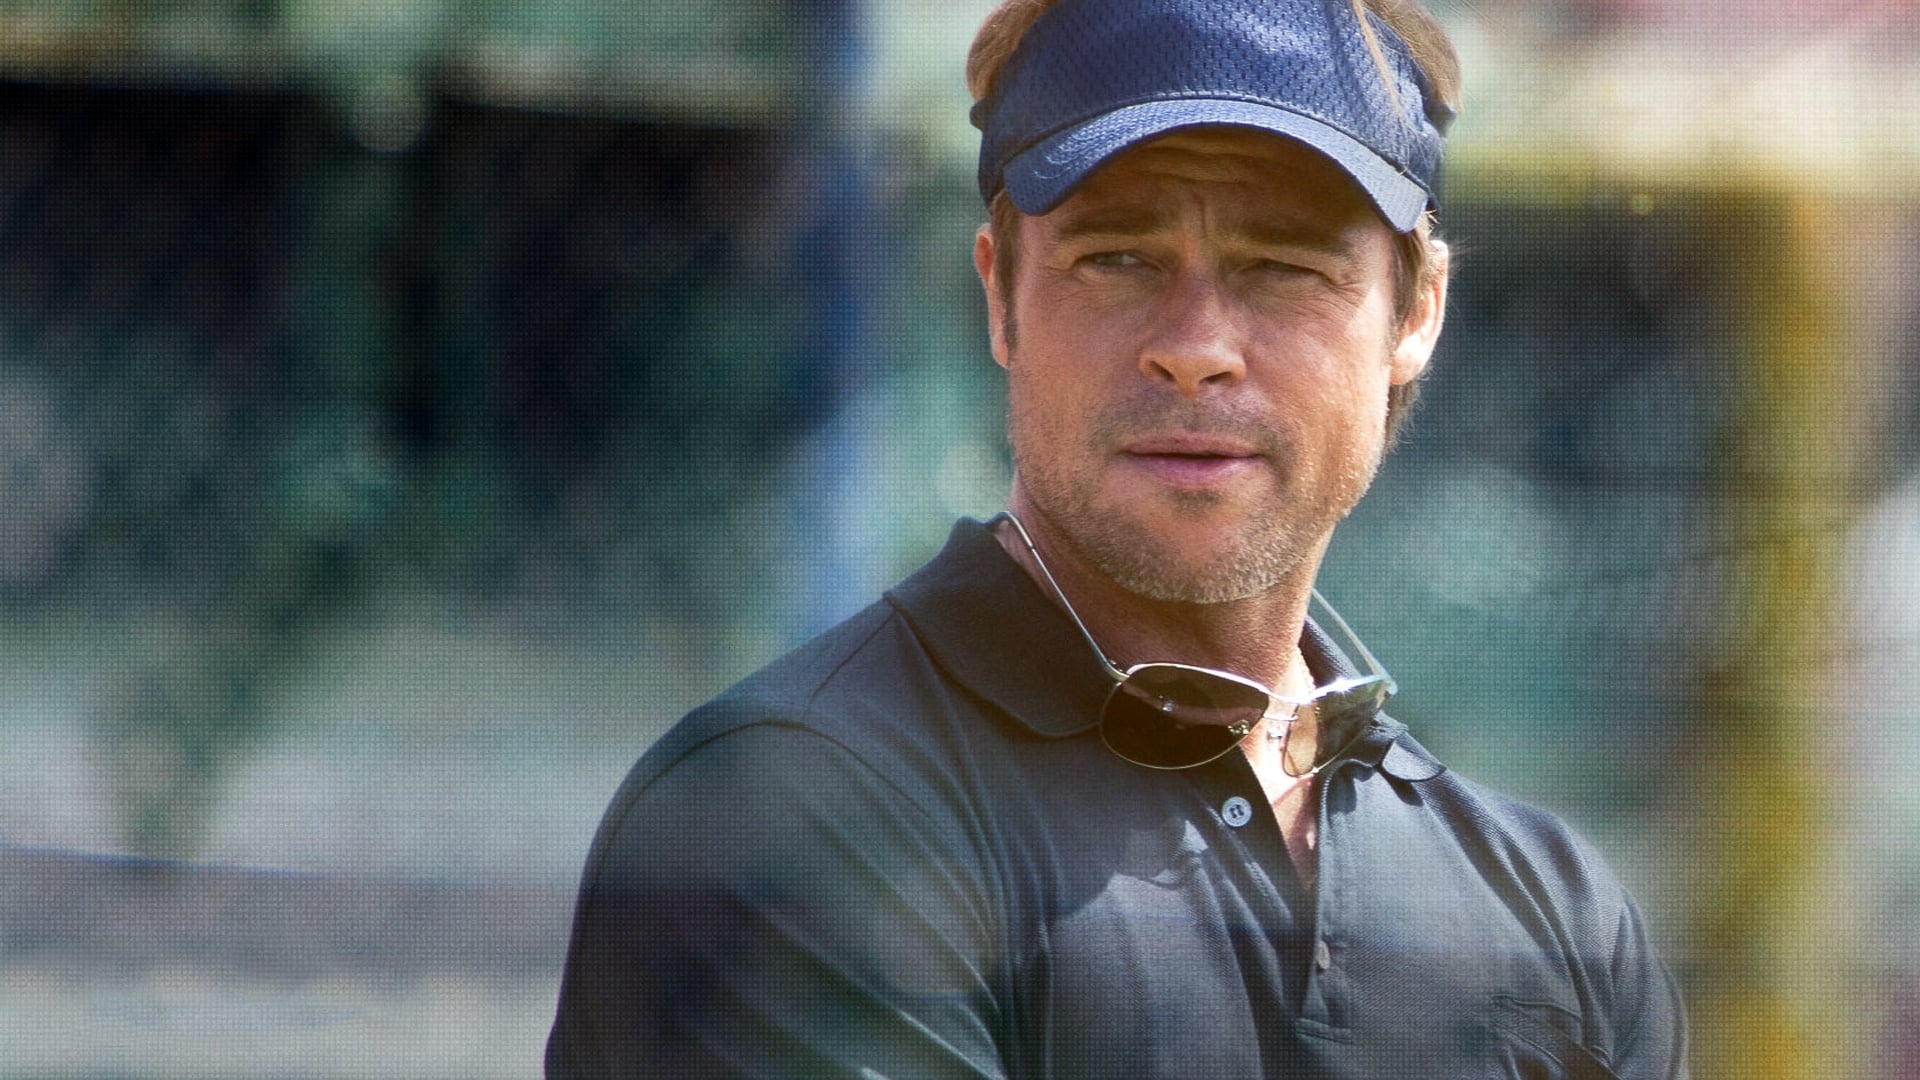 Moneyball: Brad Pitt as Billy Beane, the general manager of the Oakland Athletics. 1920x1080 Full HD Wallpaper.